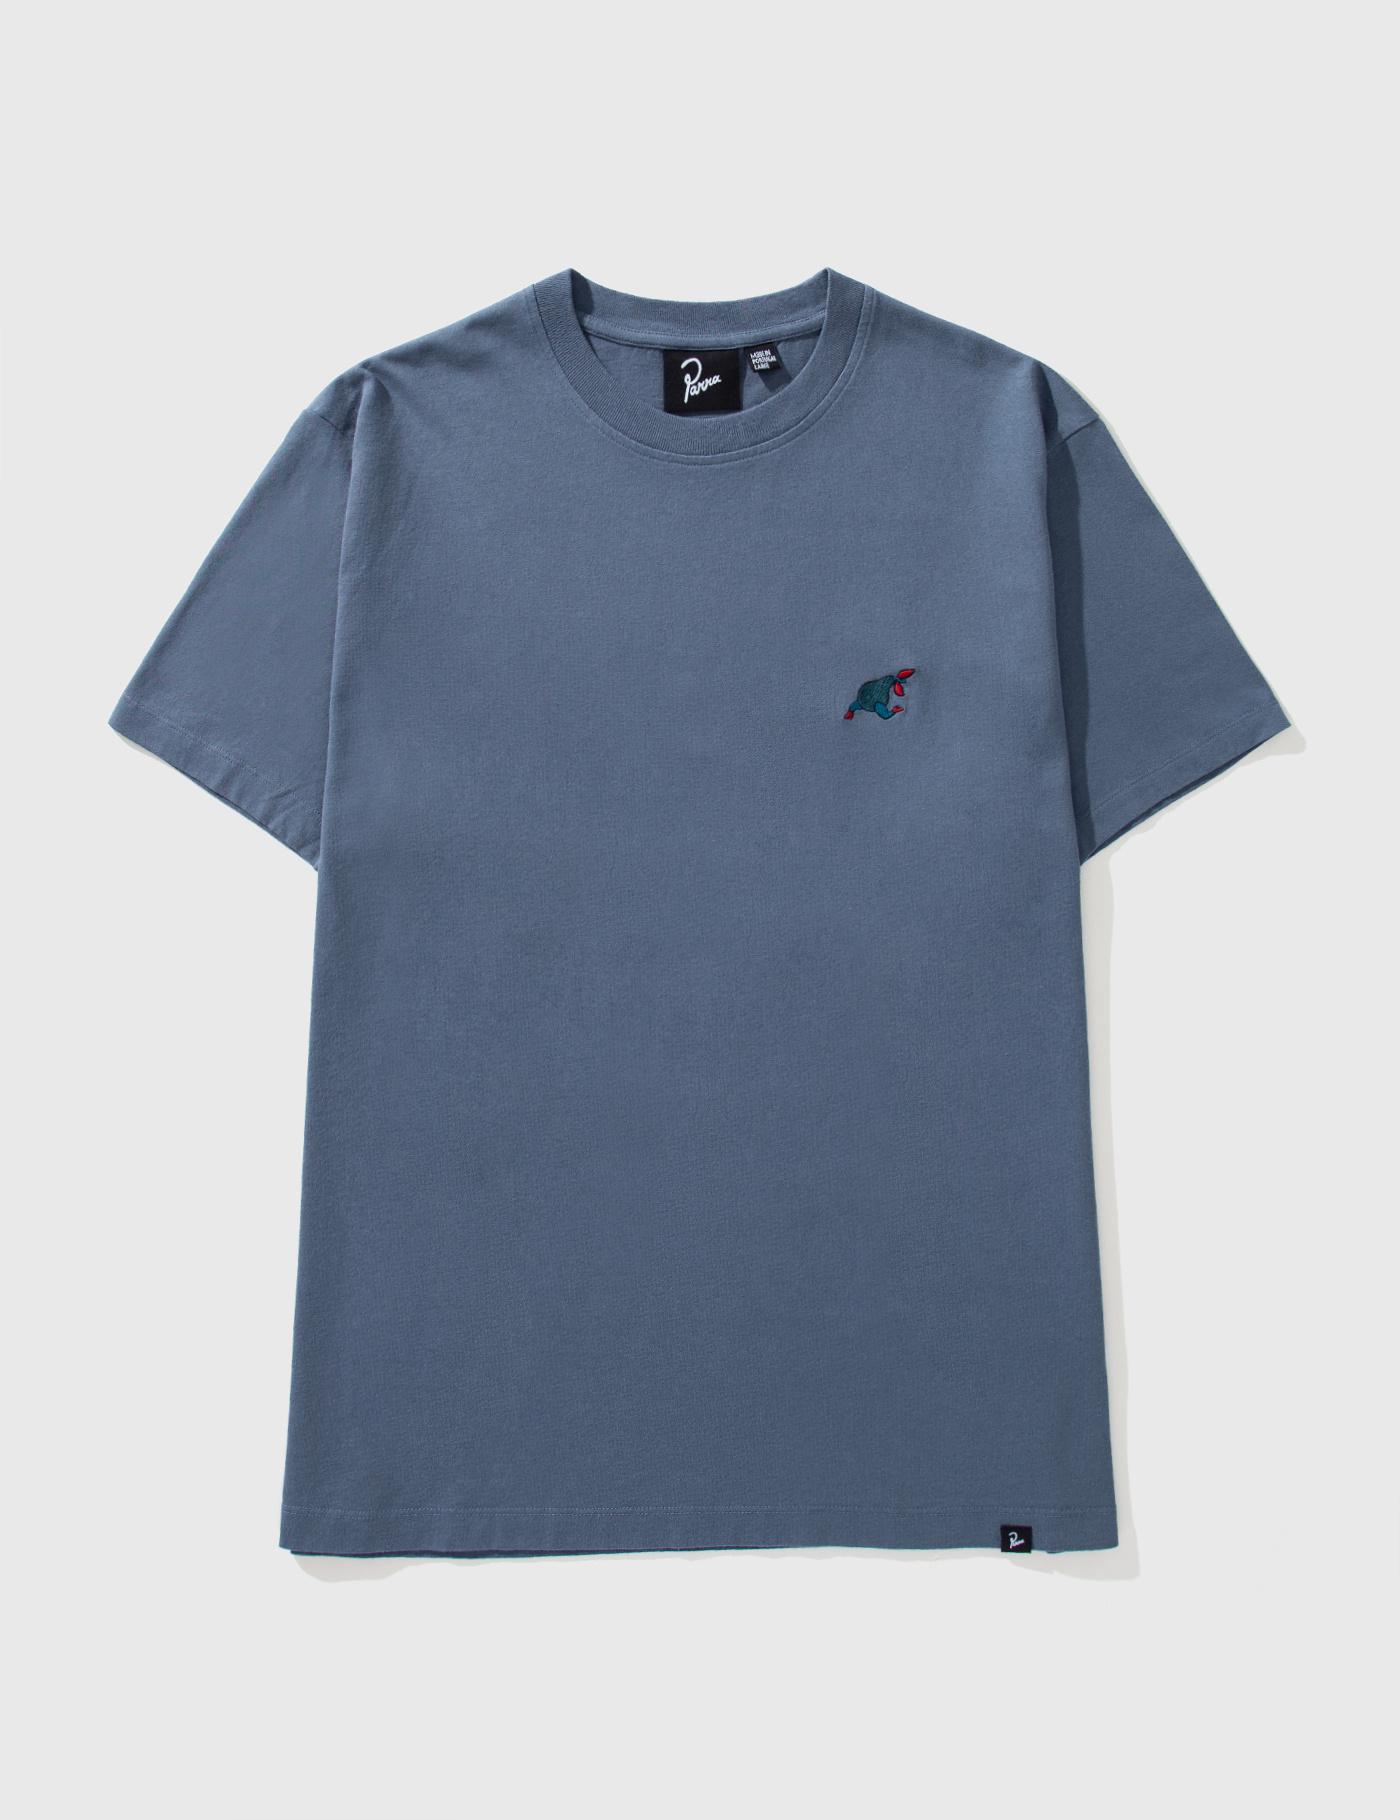 Blue Sitting Pear T-shirt by BY PARRA